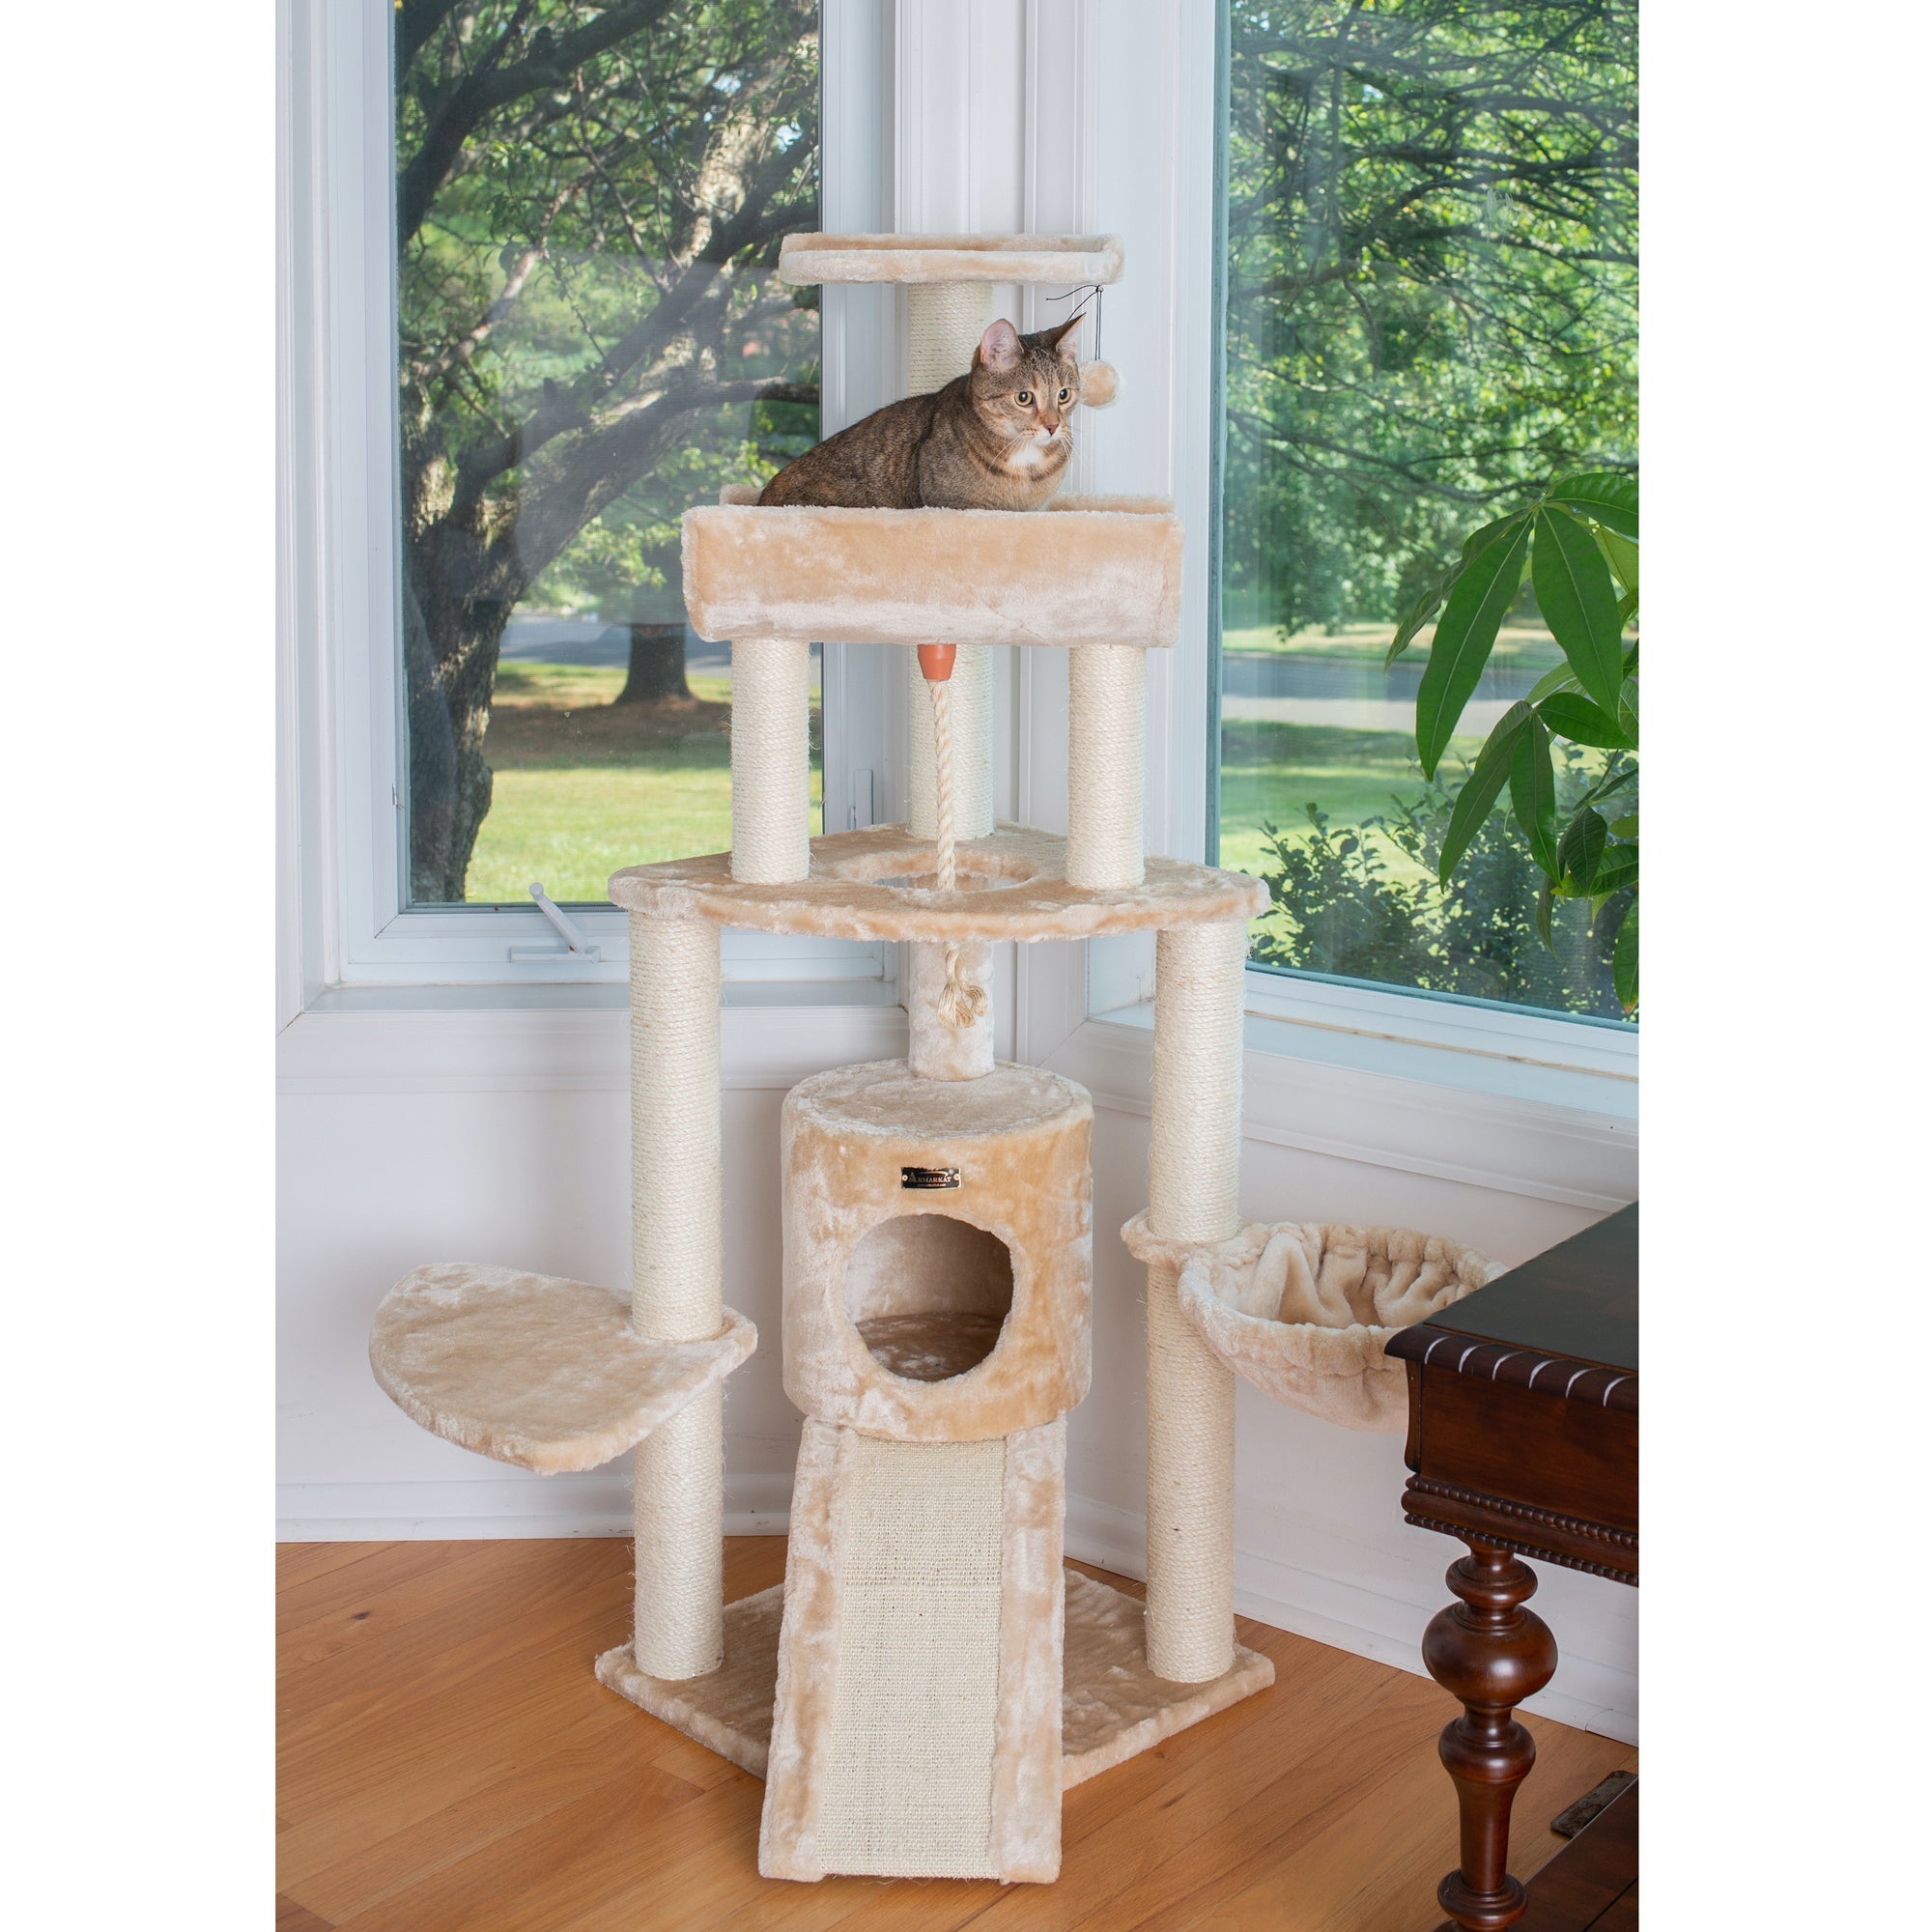 Armarkat Spacious Thick Fur Cat Tower With Basket Lounge, Ramp, Beige A5806